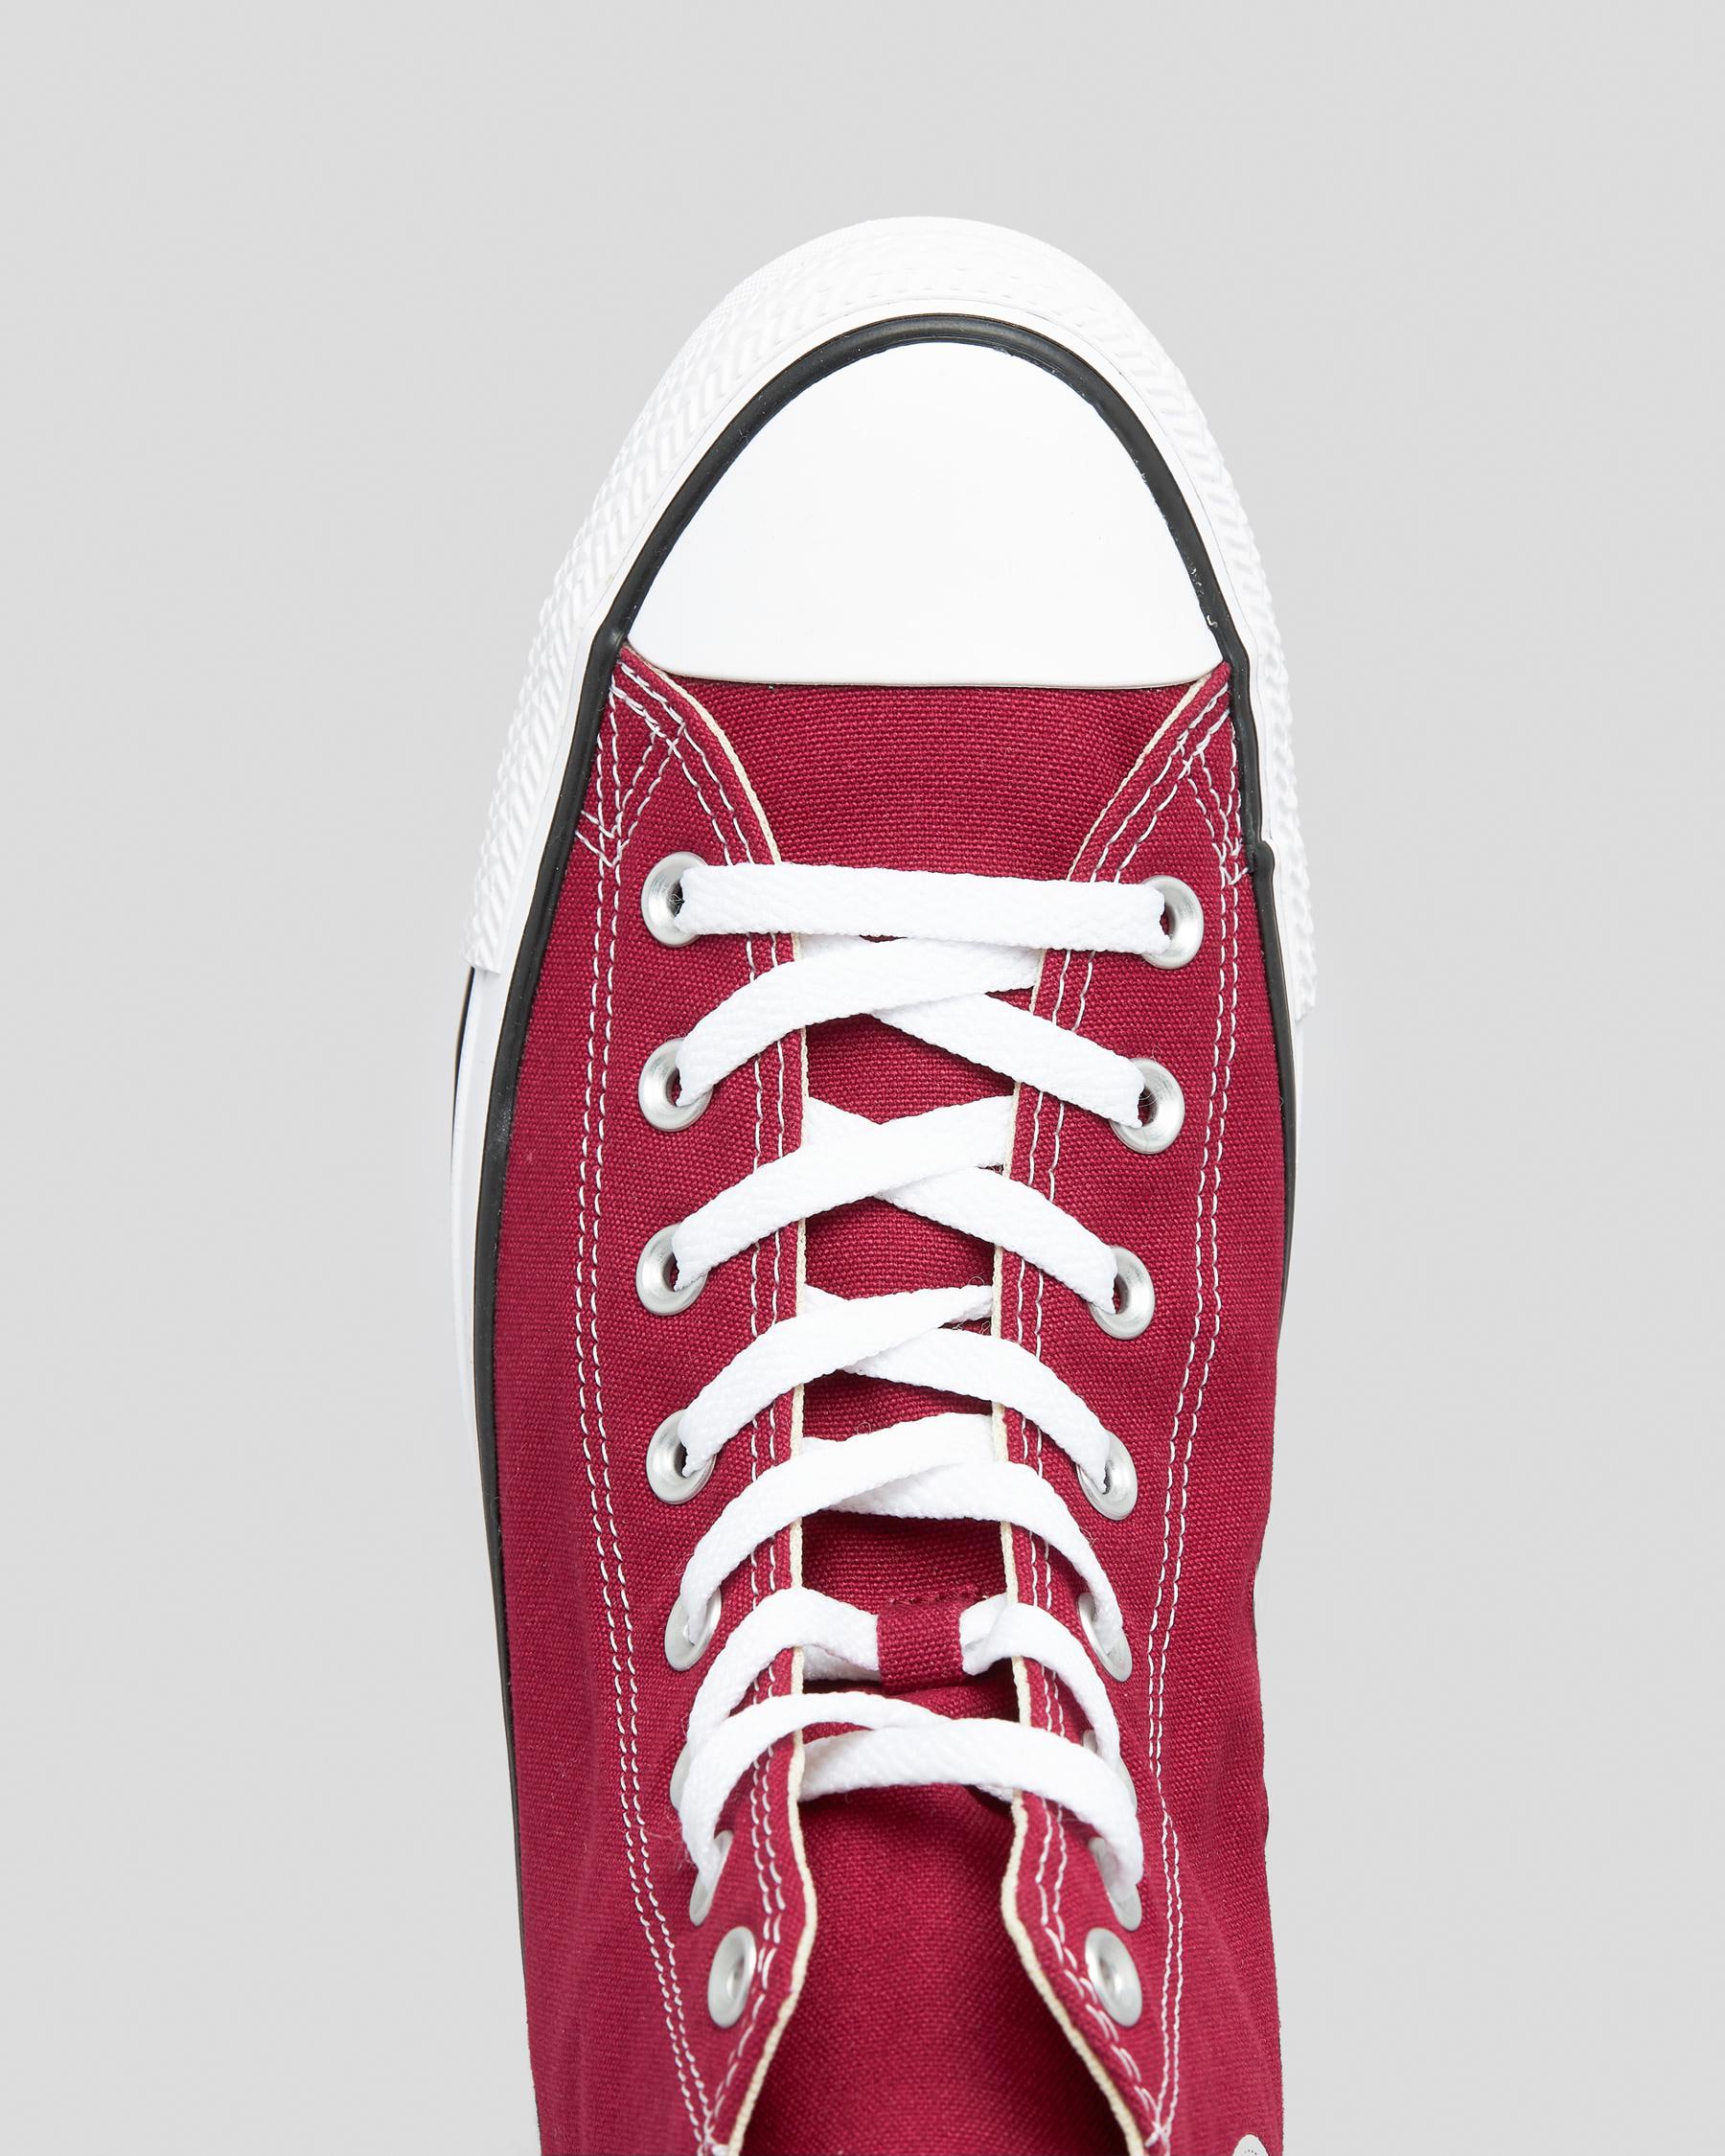 Shop Converse Chuck Taylor All Star Shoes In Maroon - Fast Shipping ...